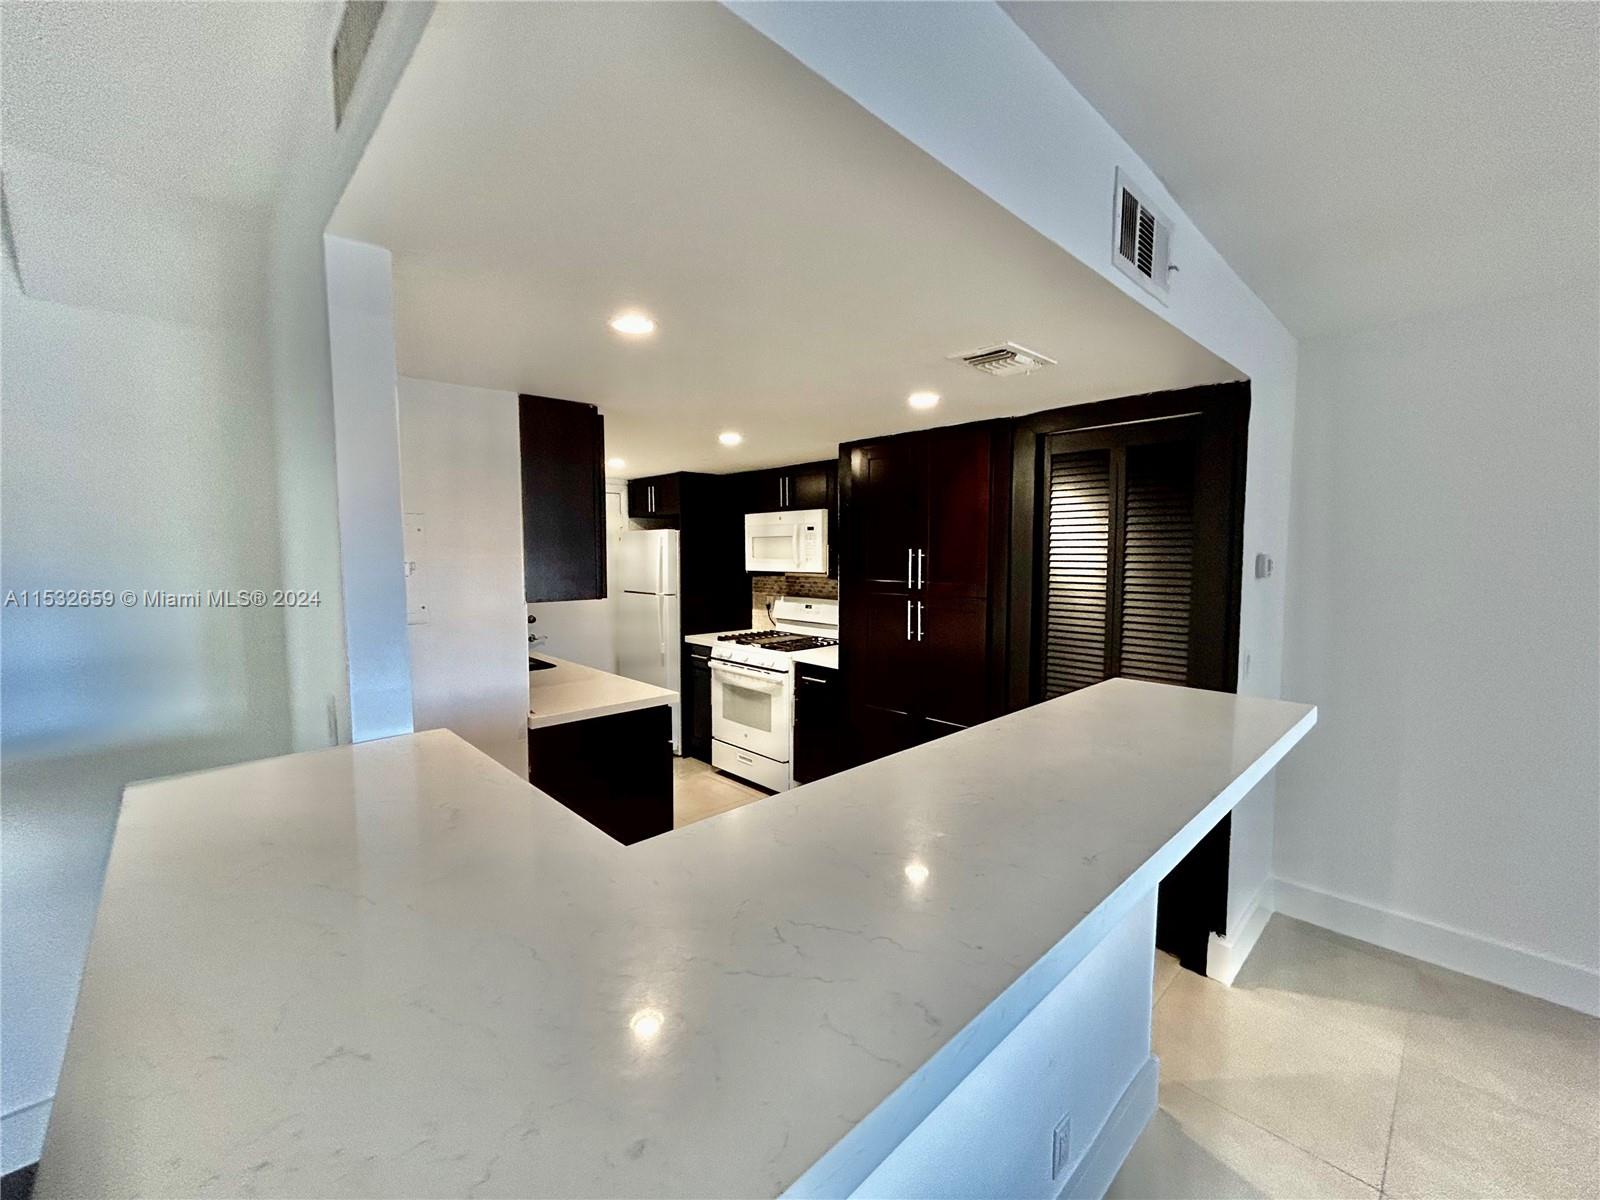 a large white kitchen with a large counter top stainless steel appliances and cabinets